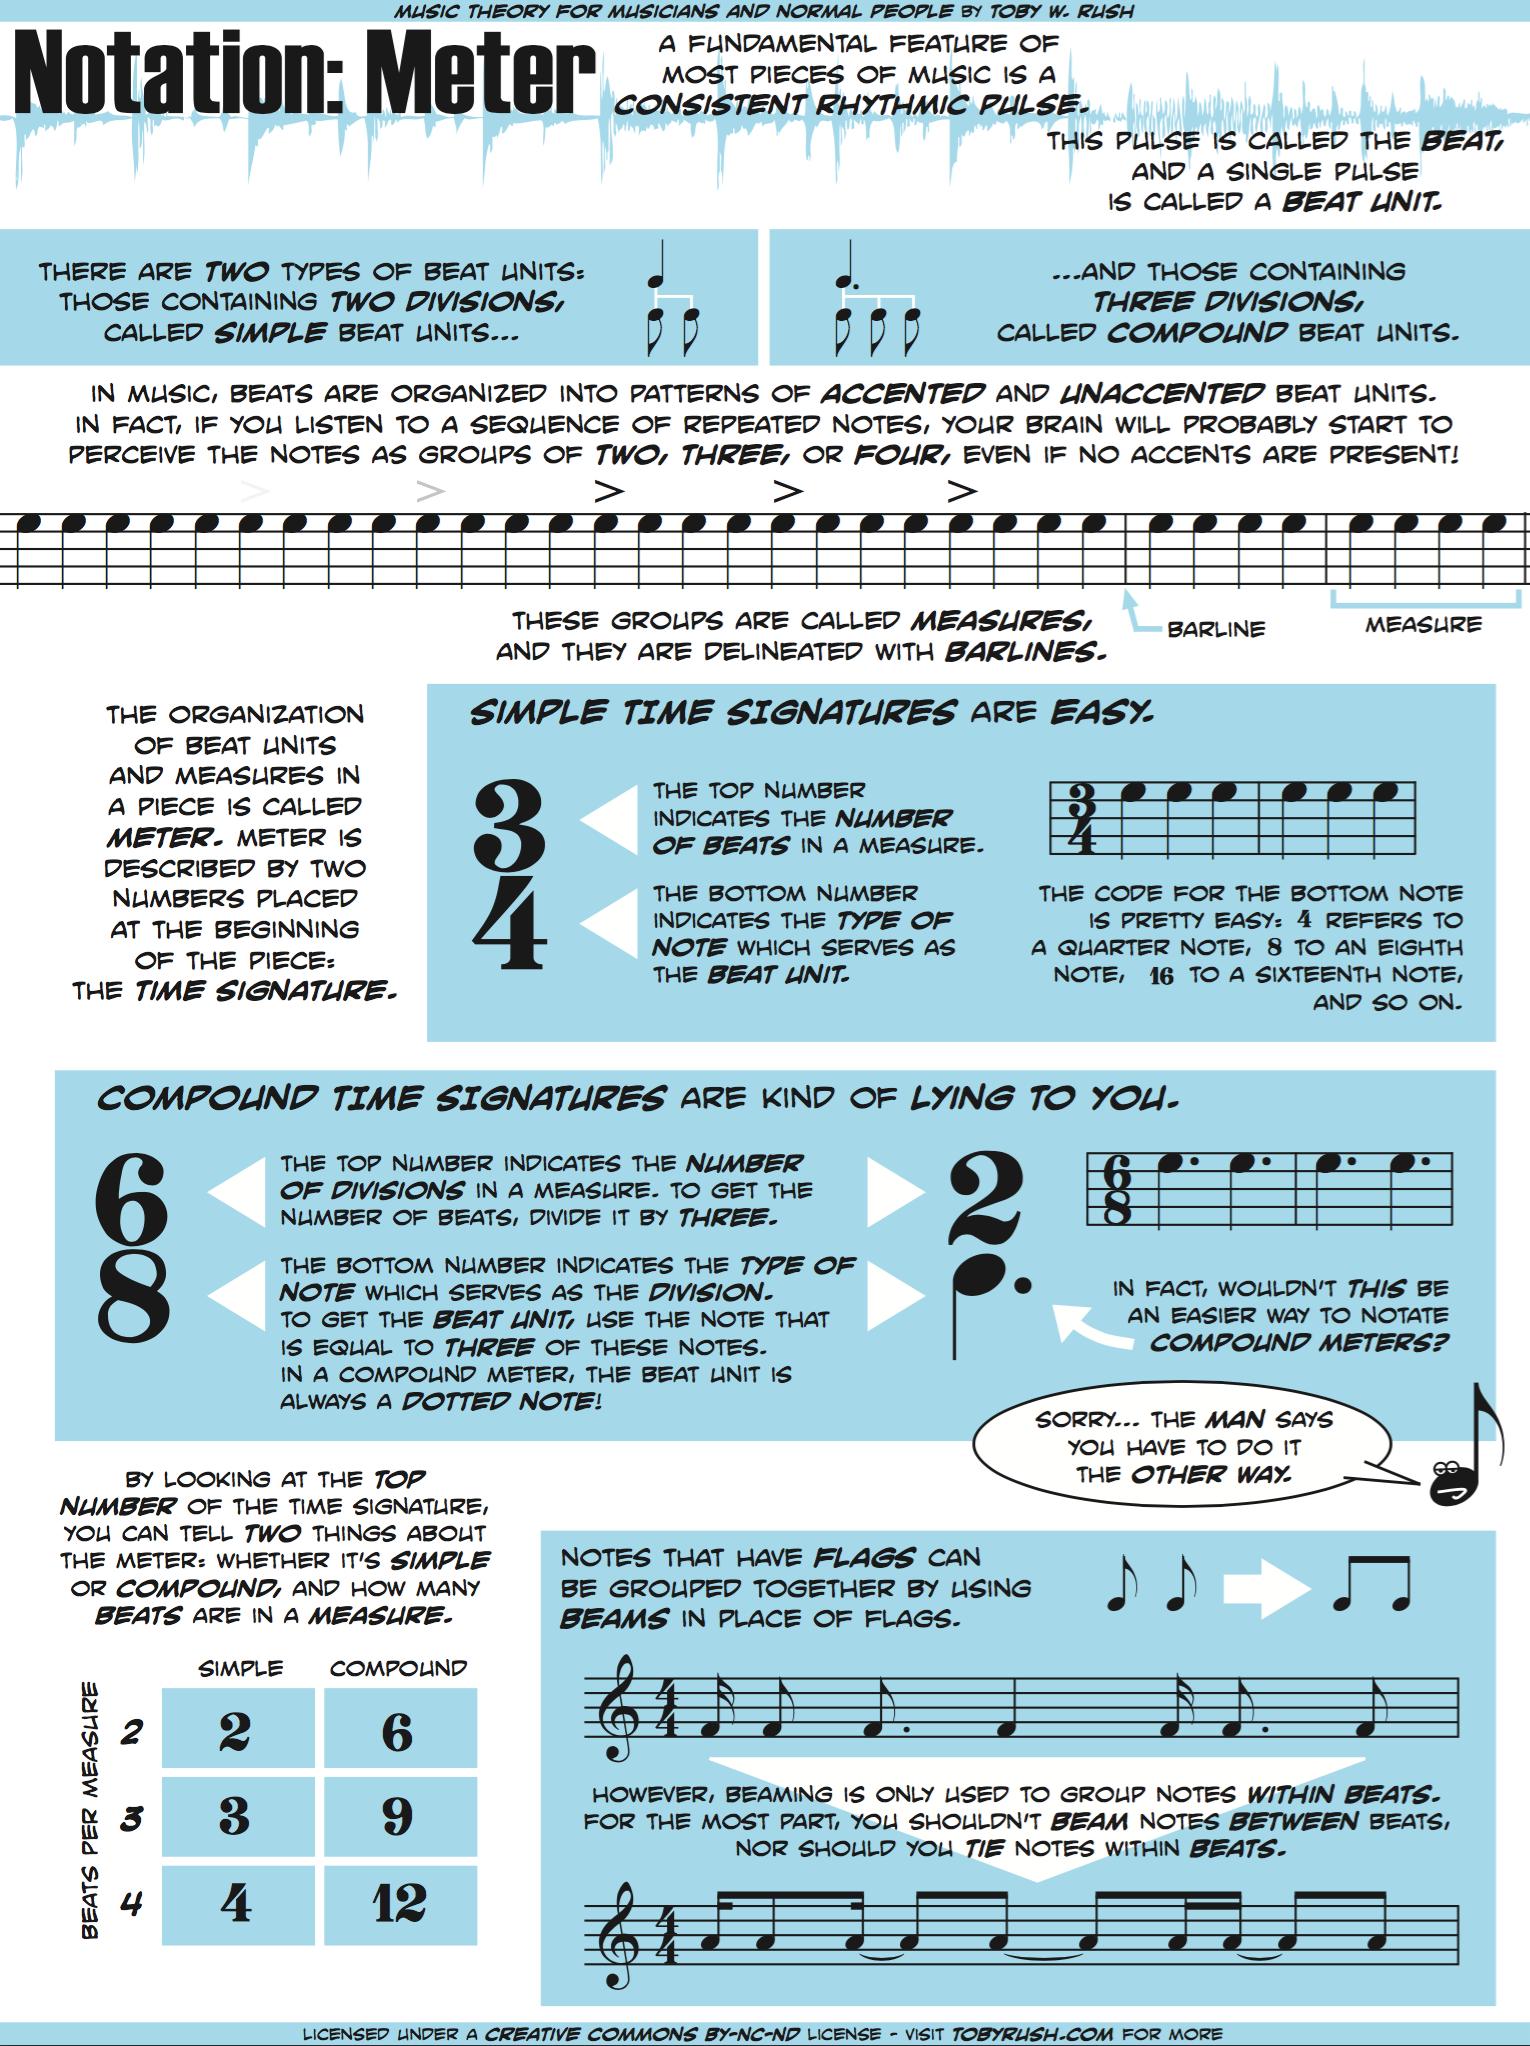 Music theory graphics by Toby W. Rush